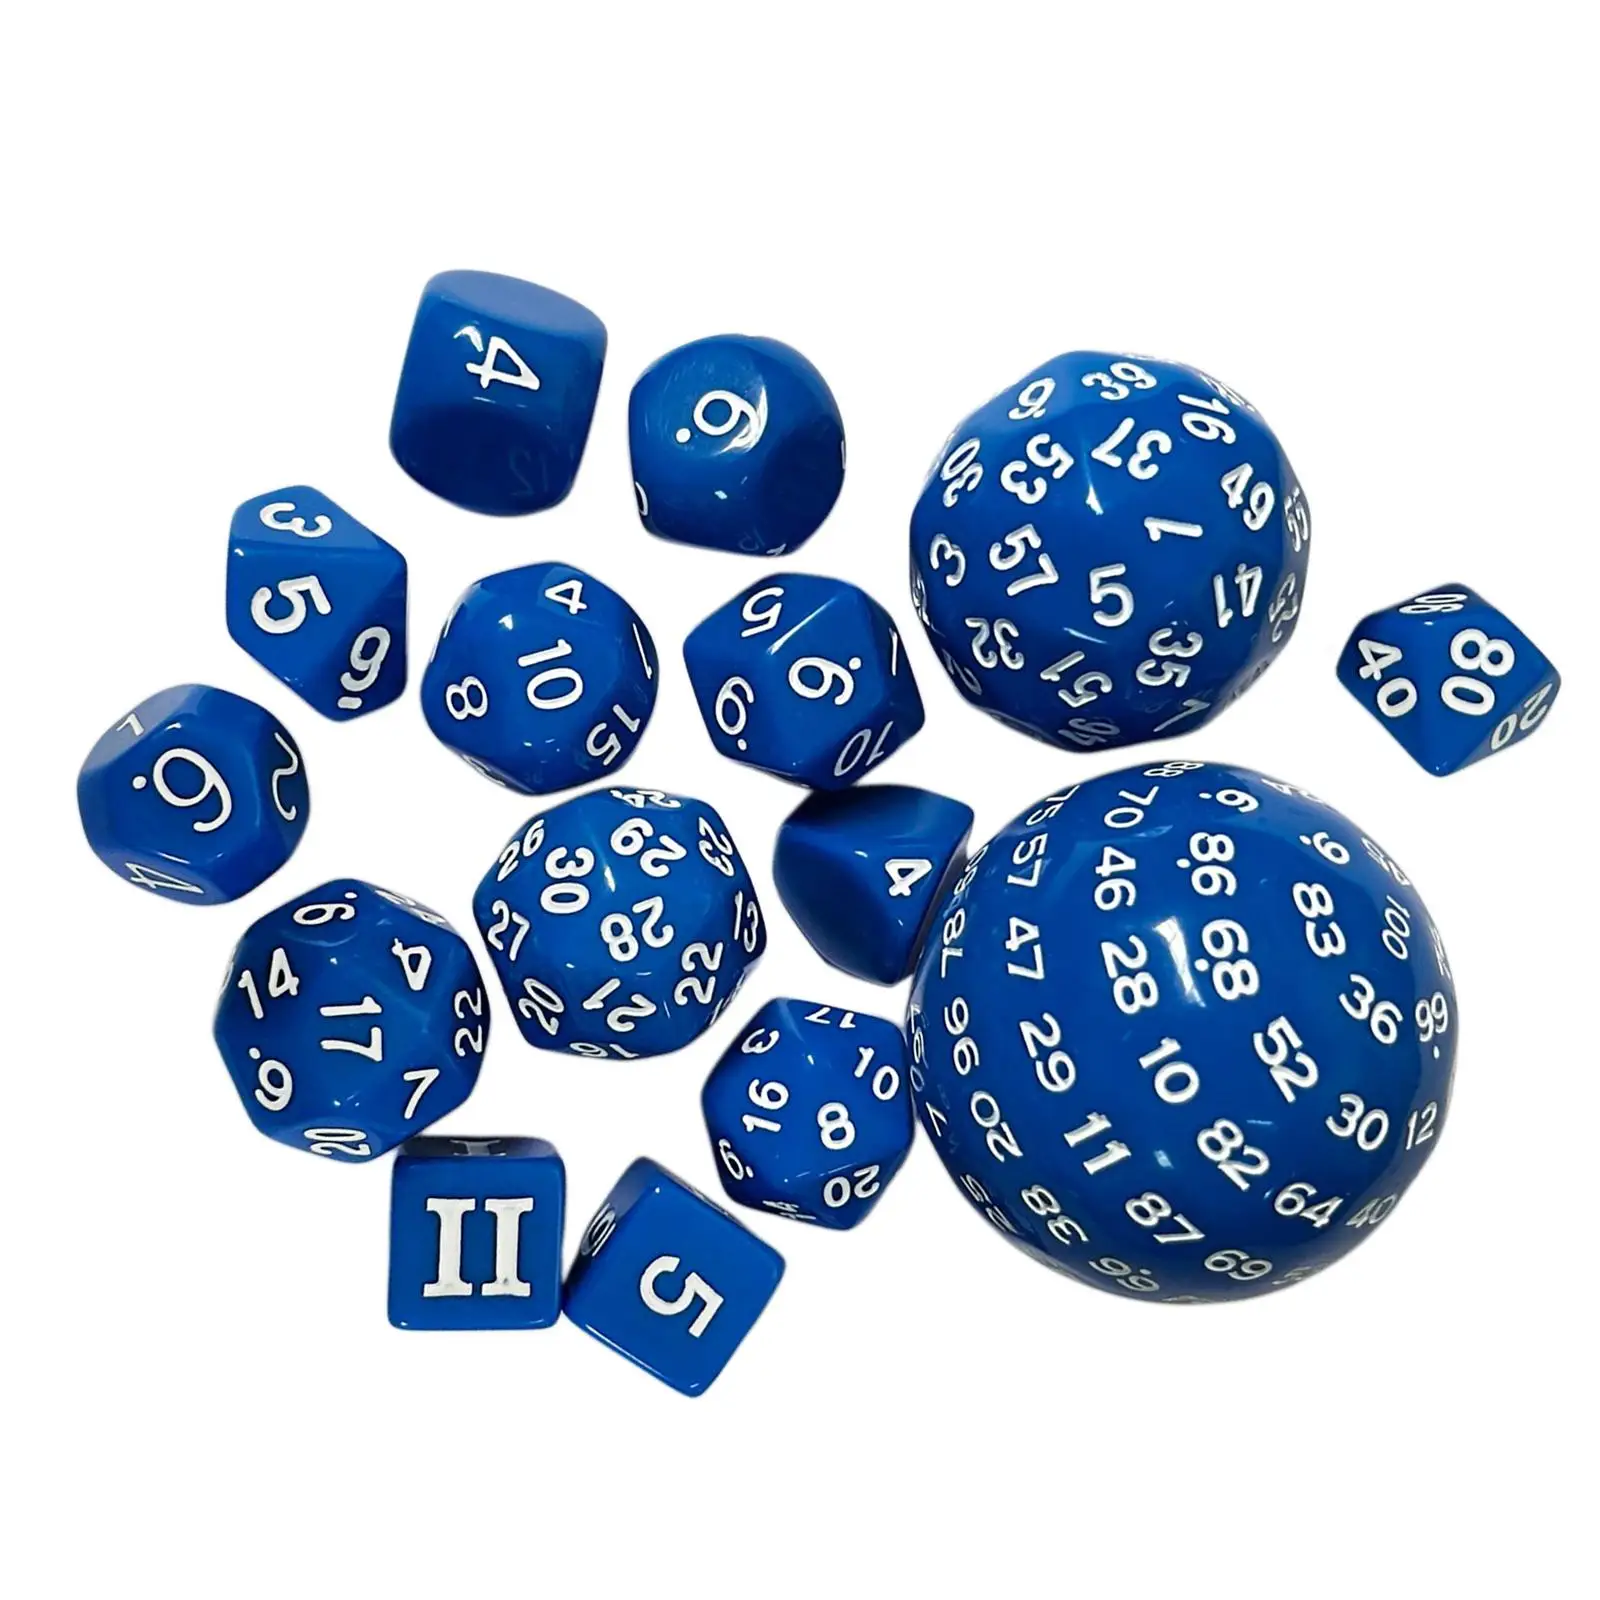 15Pcs Role Playing RPG Game Dice Acrylic Multi Sided Game Dice Set Acrylic Polyhedral Dice for Board game Favors Entertainment